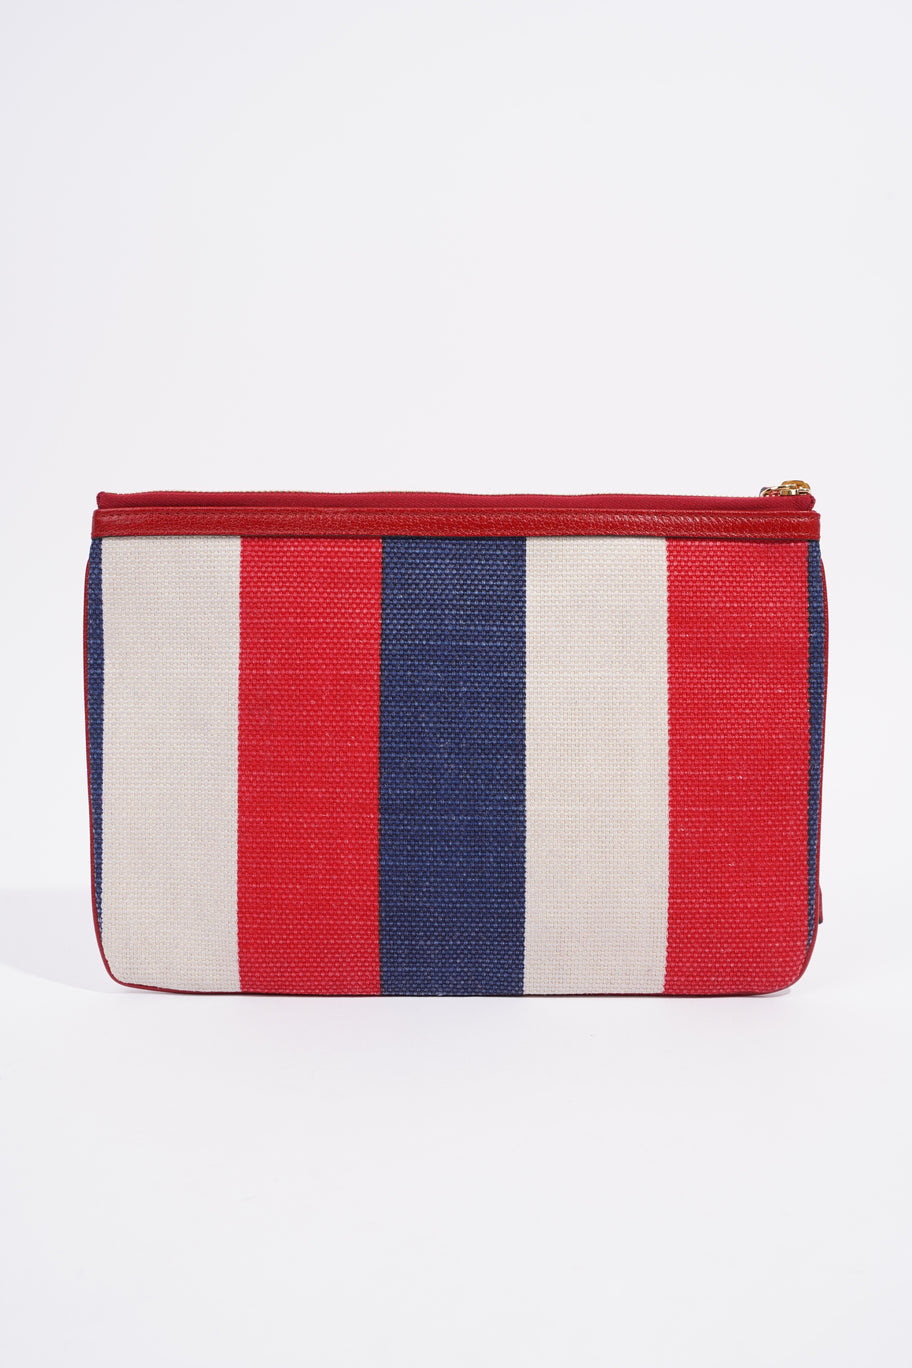 Clutch Red / White / Blue Canvas Image 4